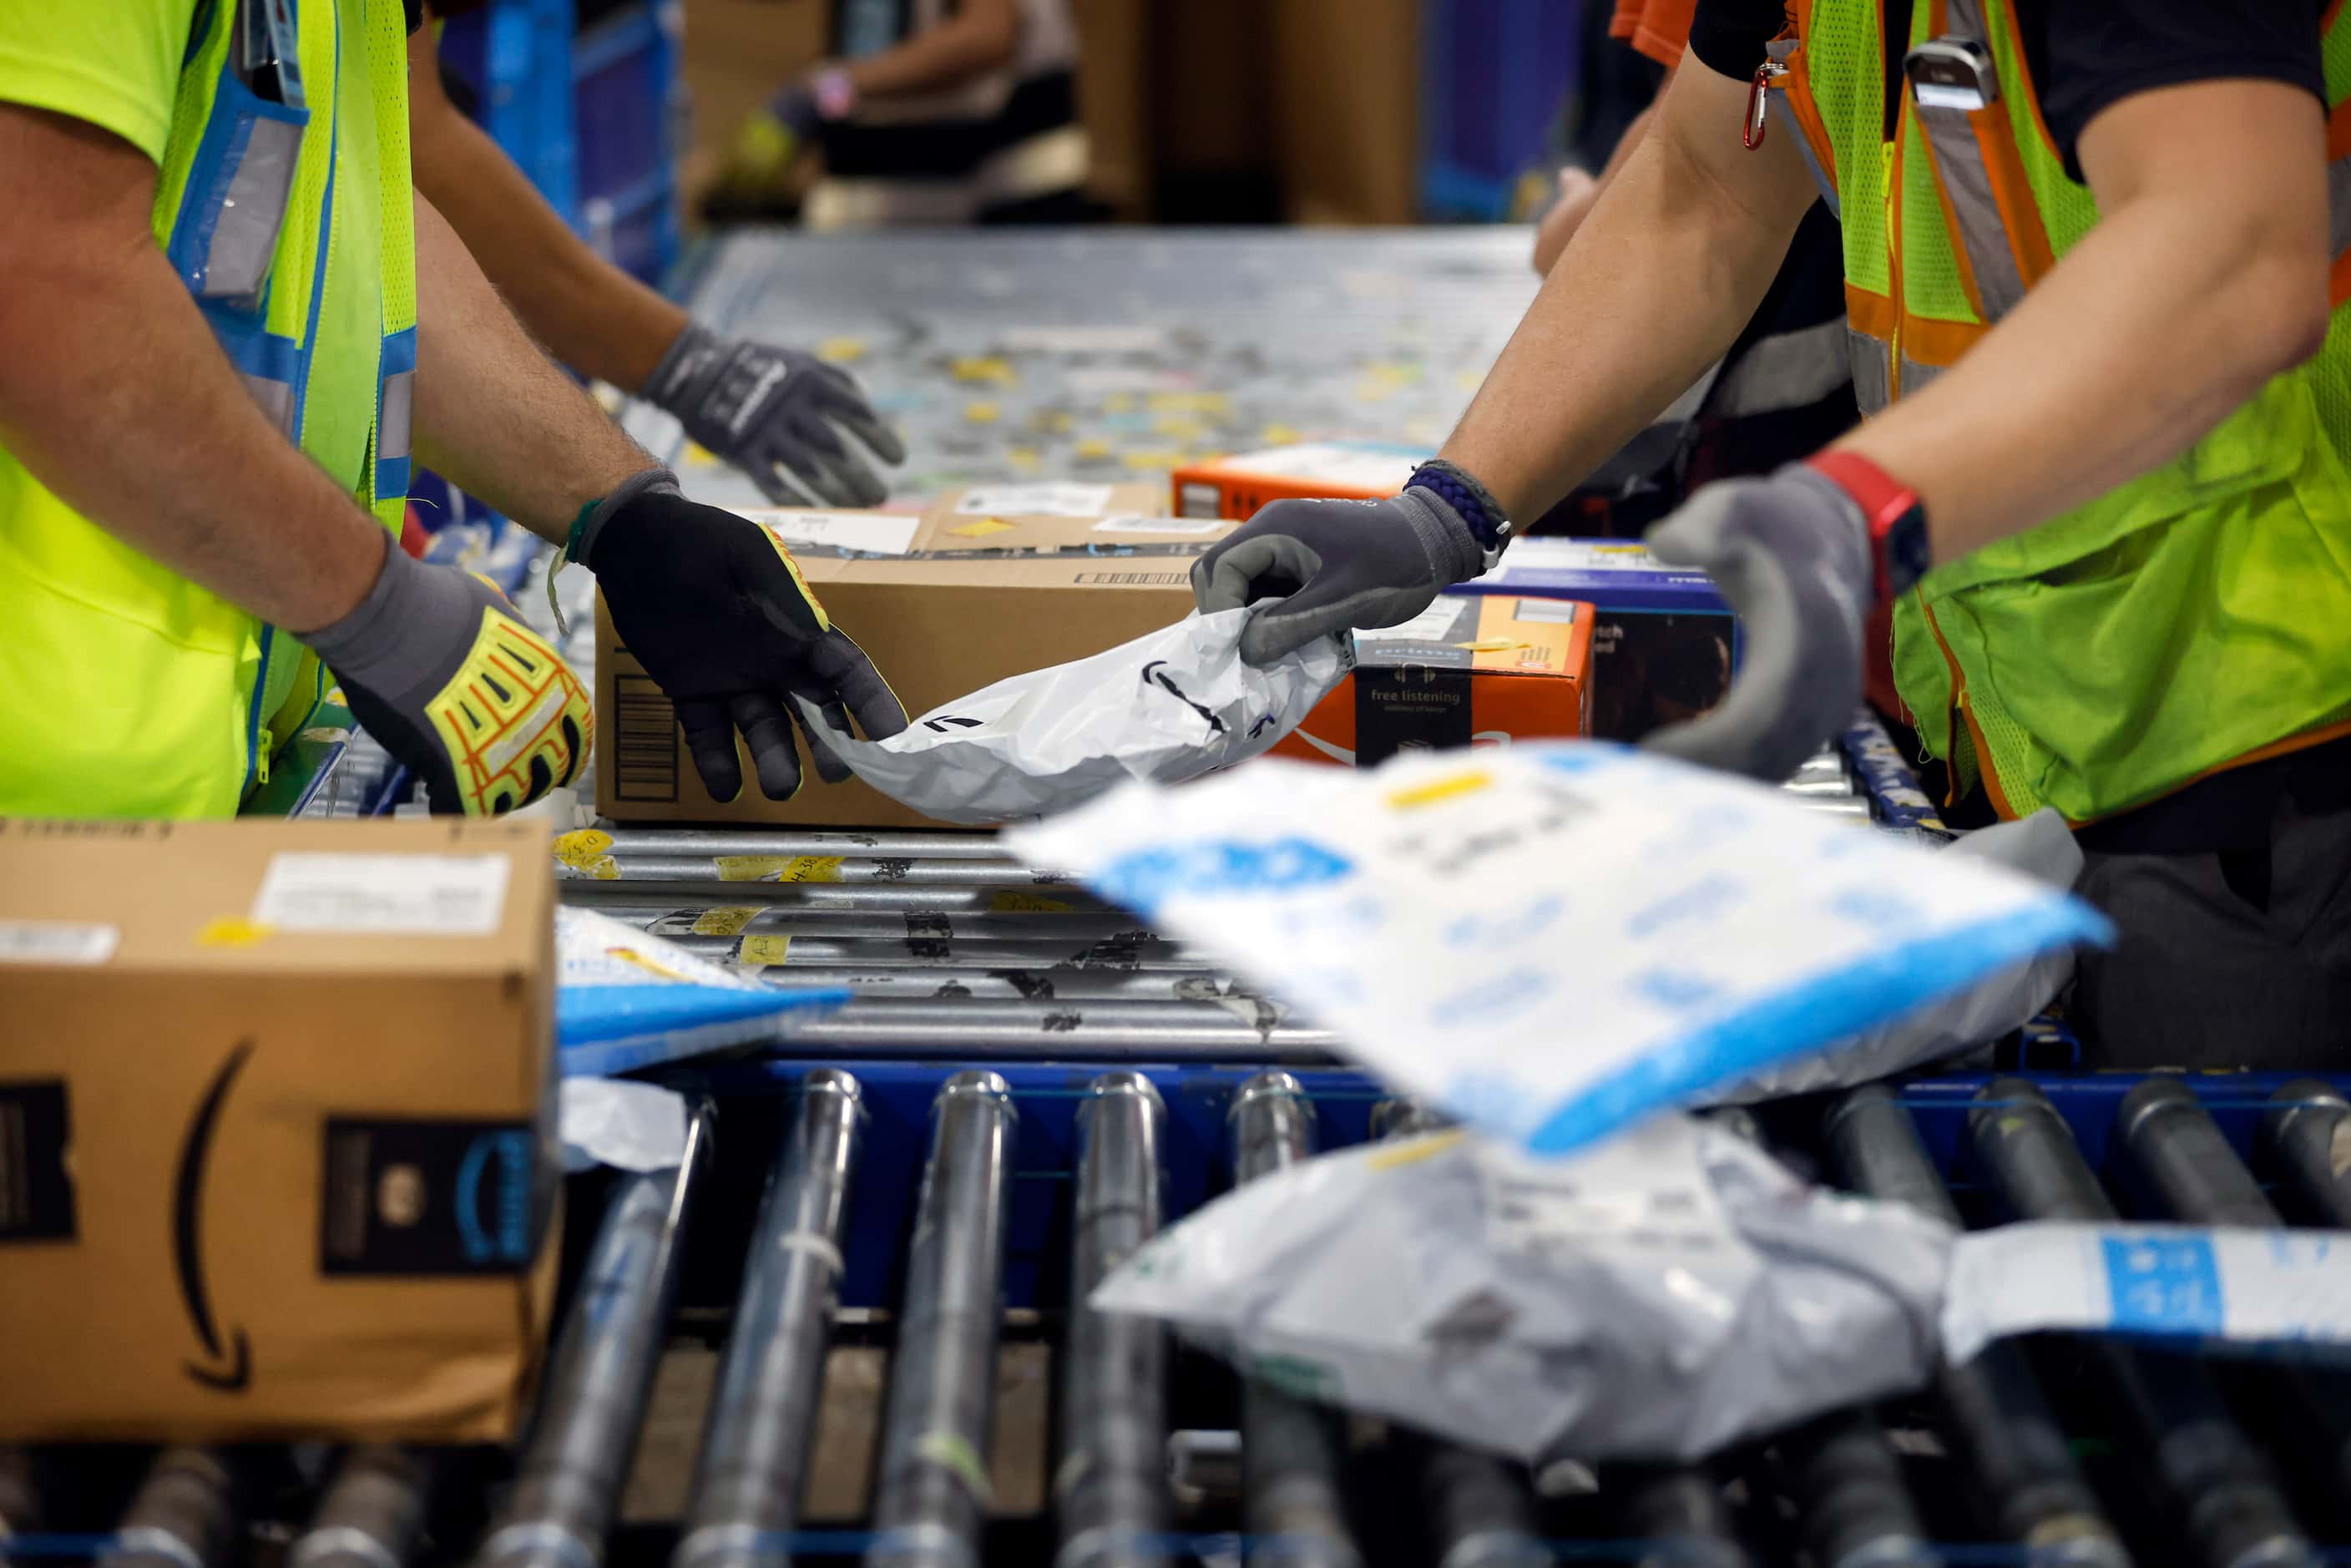 Crew members sort early PRIME day deal packages as they arrive via trucks at one of the...